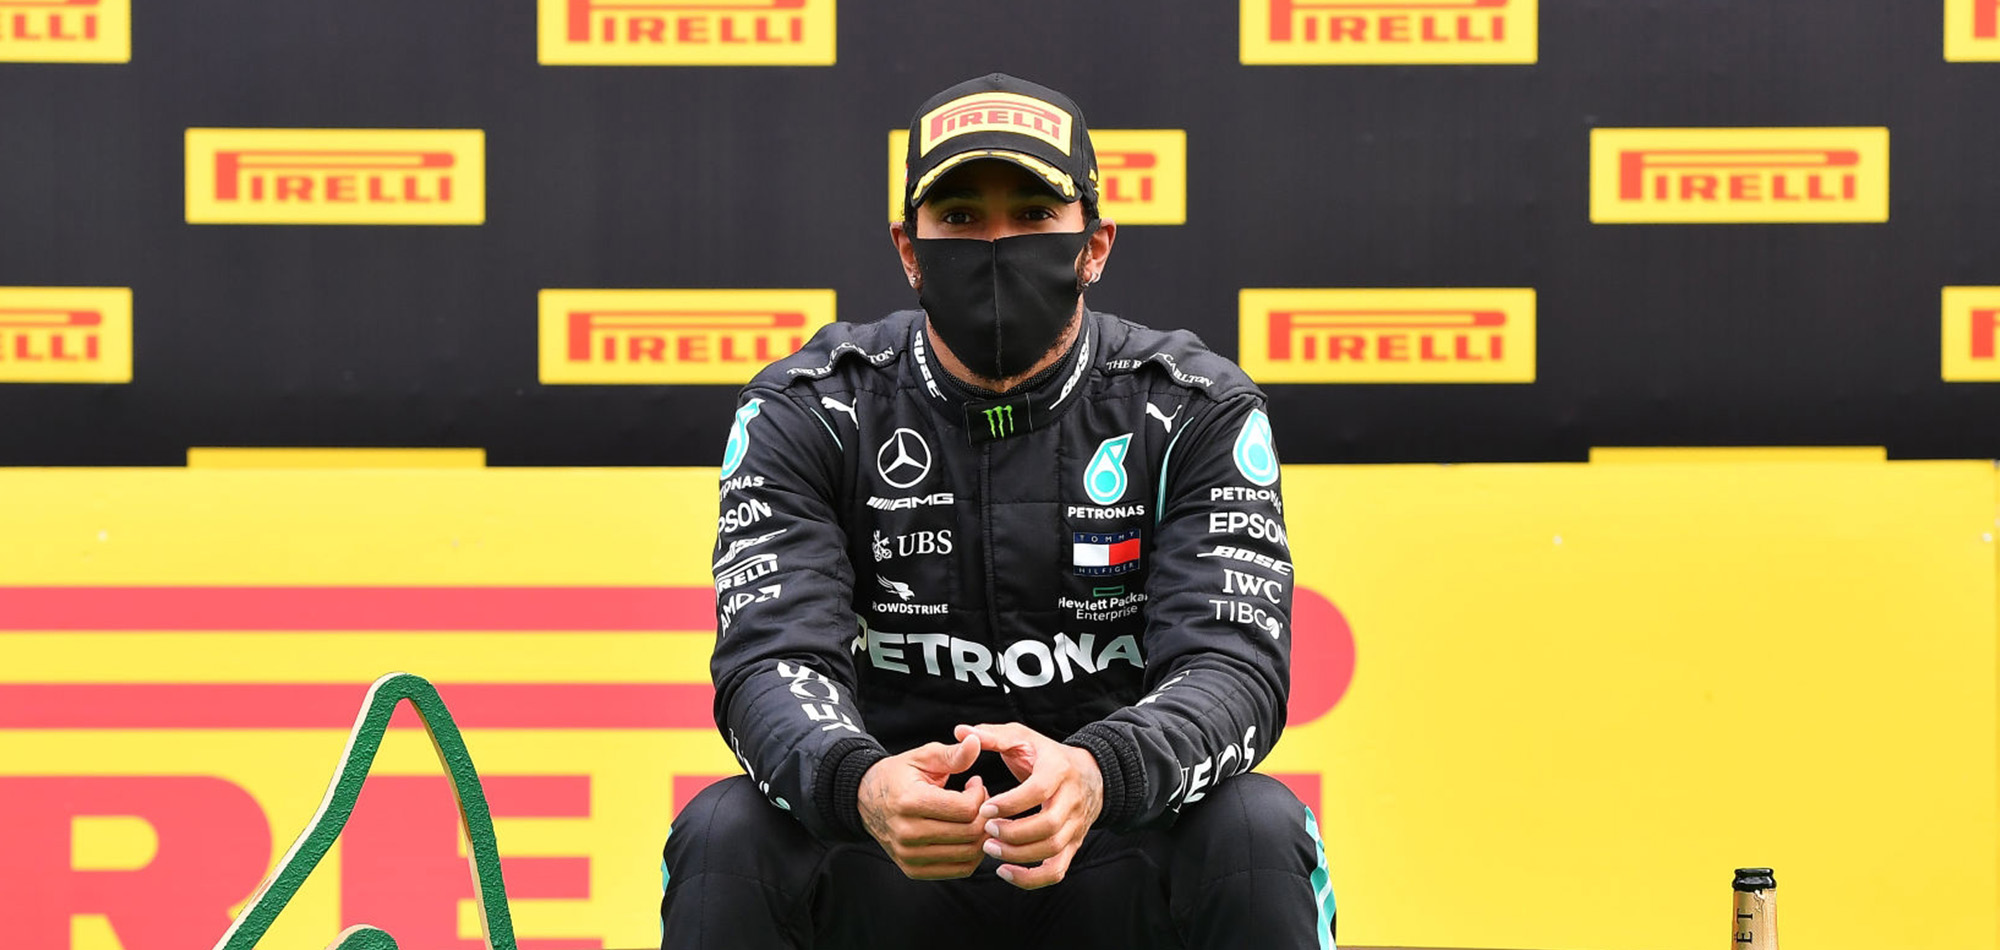 Lewis Hamilton takes dominant Styrian Grand Prix win after Ferraris collide